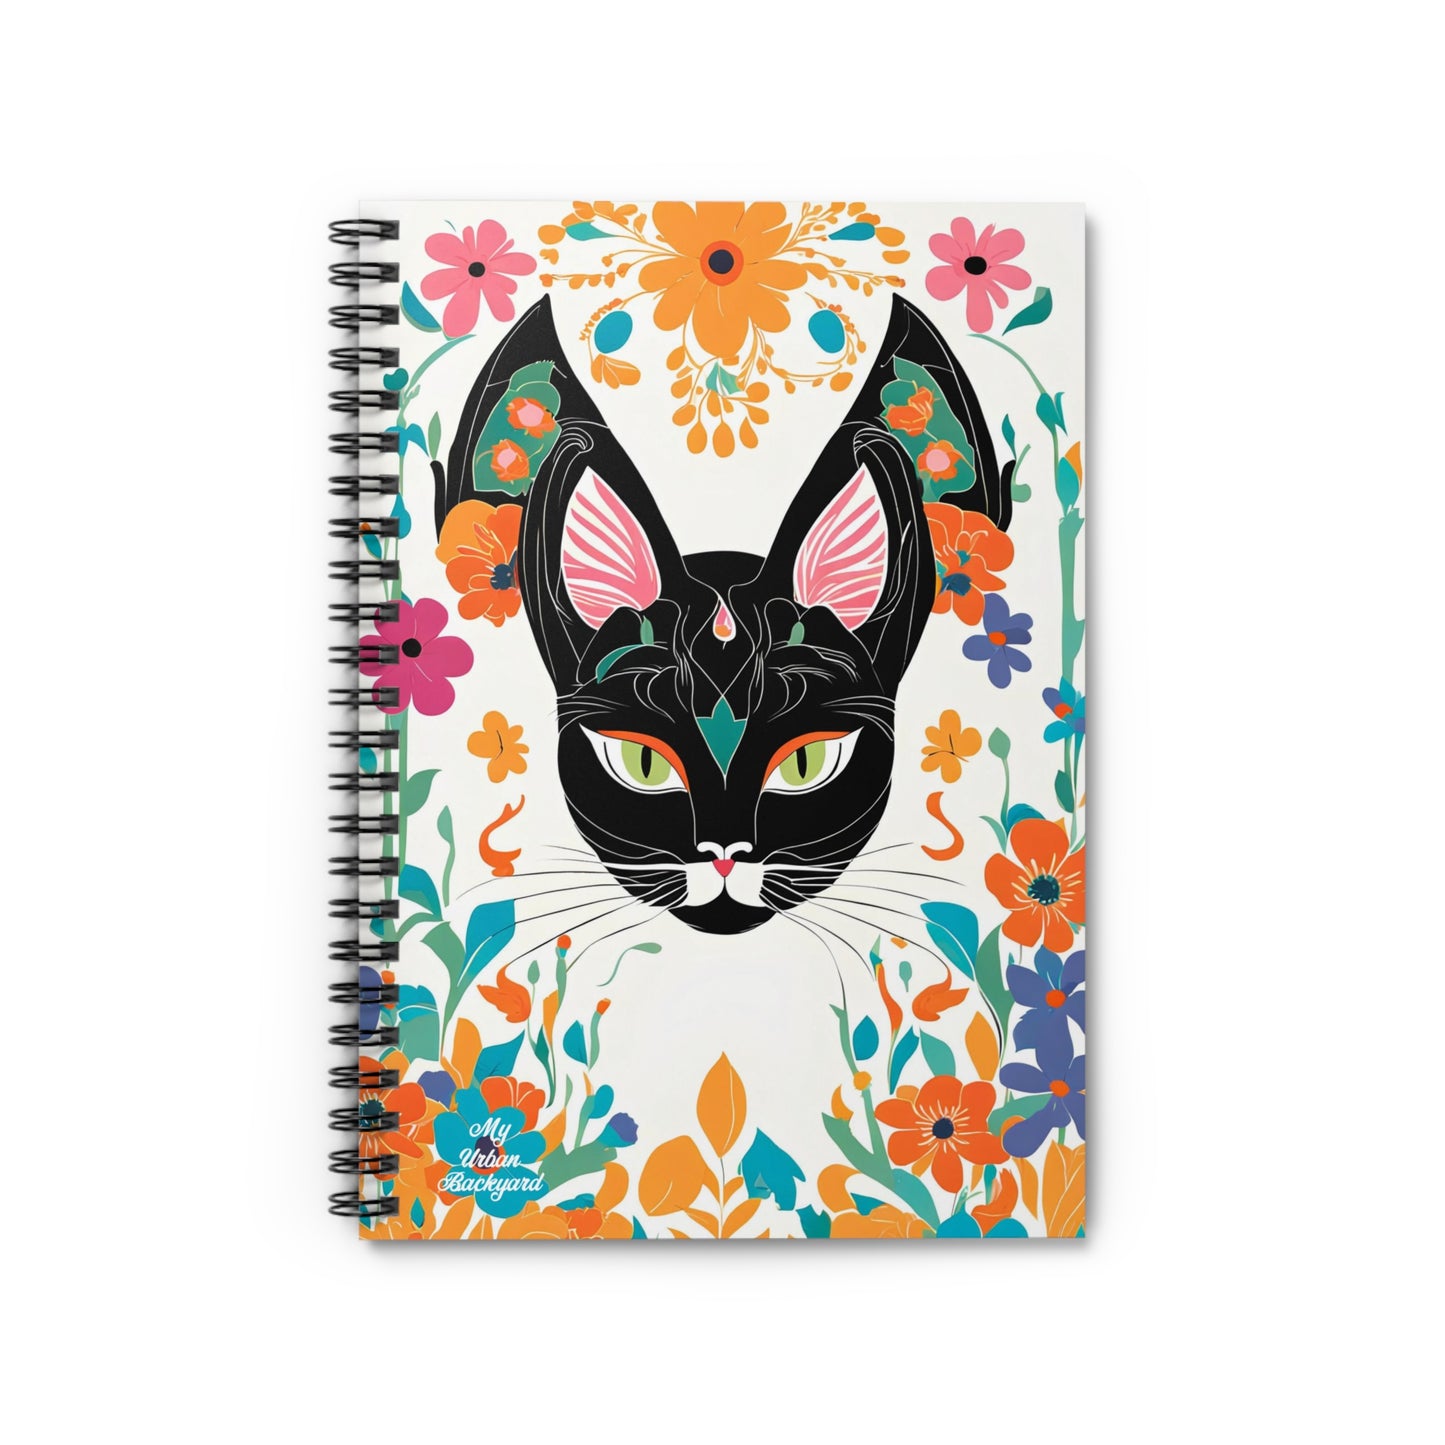 Black Cat with Green Eyes & Flowers, Spiral Notebook Journal - Write in Style